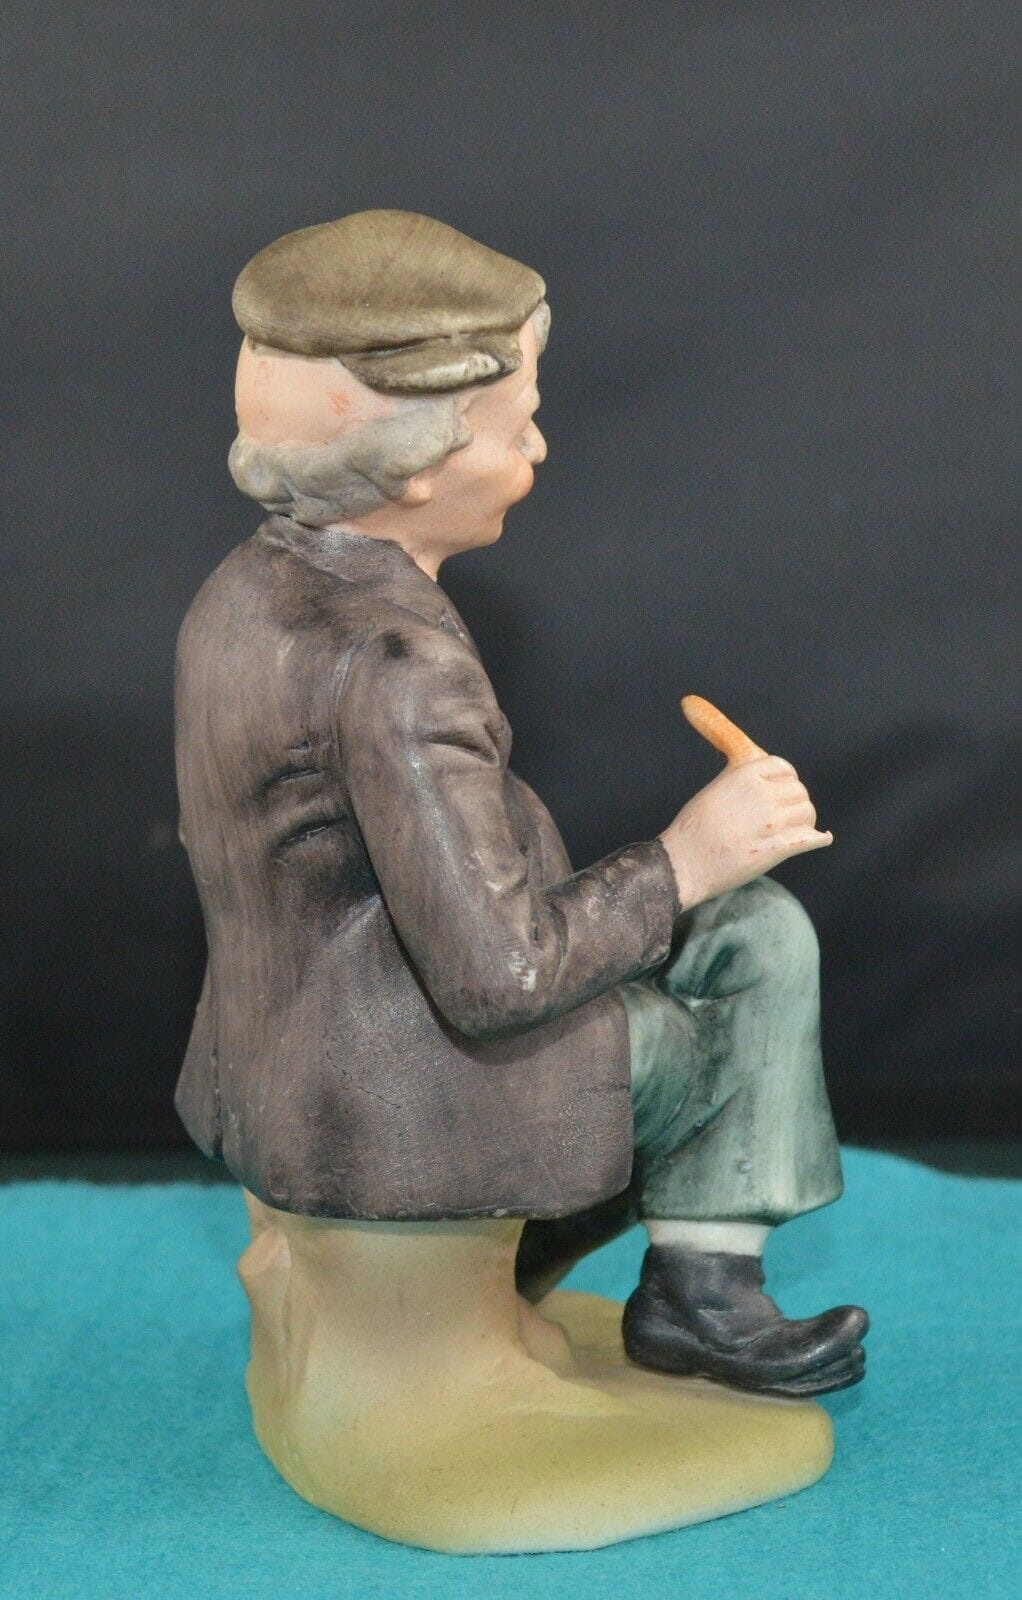 DECORATIVE FIGURINE A MALE FIGURINE SITTING CROSSED LEG & LADY FIGURINE w/JUG(PREVIOUSLY OWNED) GOOD CONDITION - TMD167207